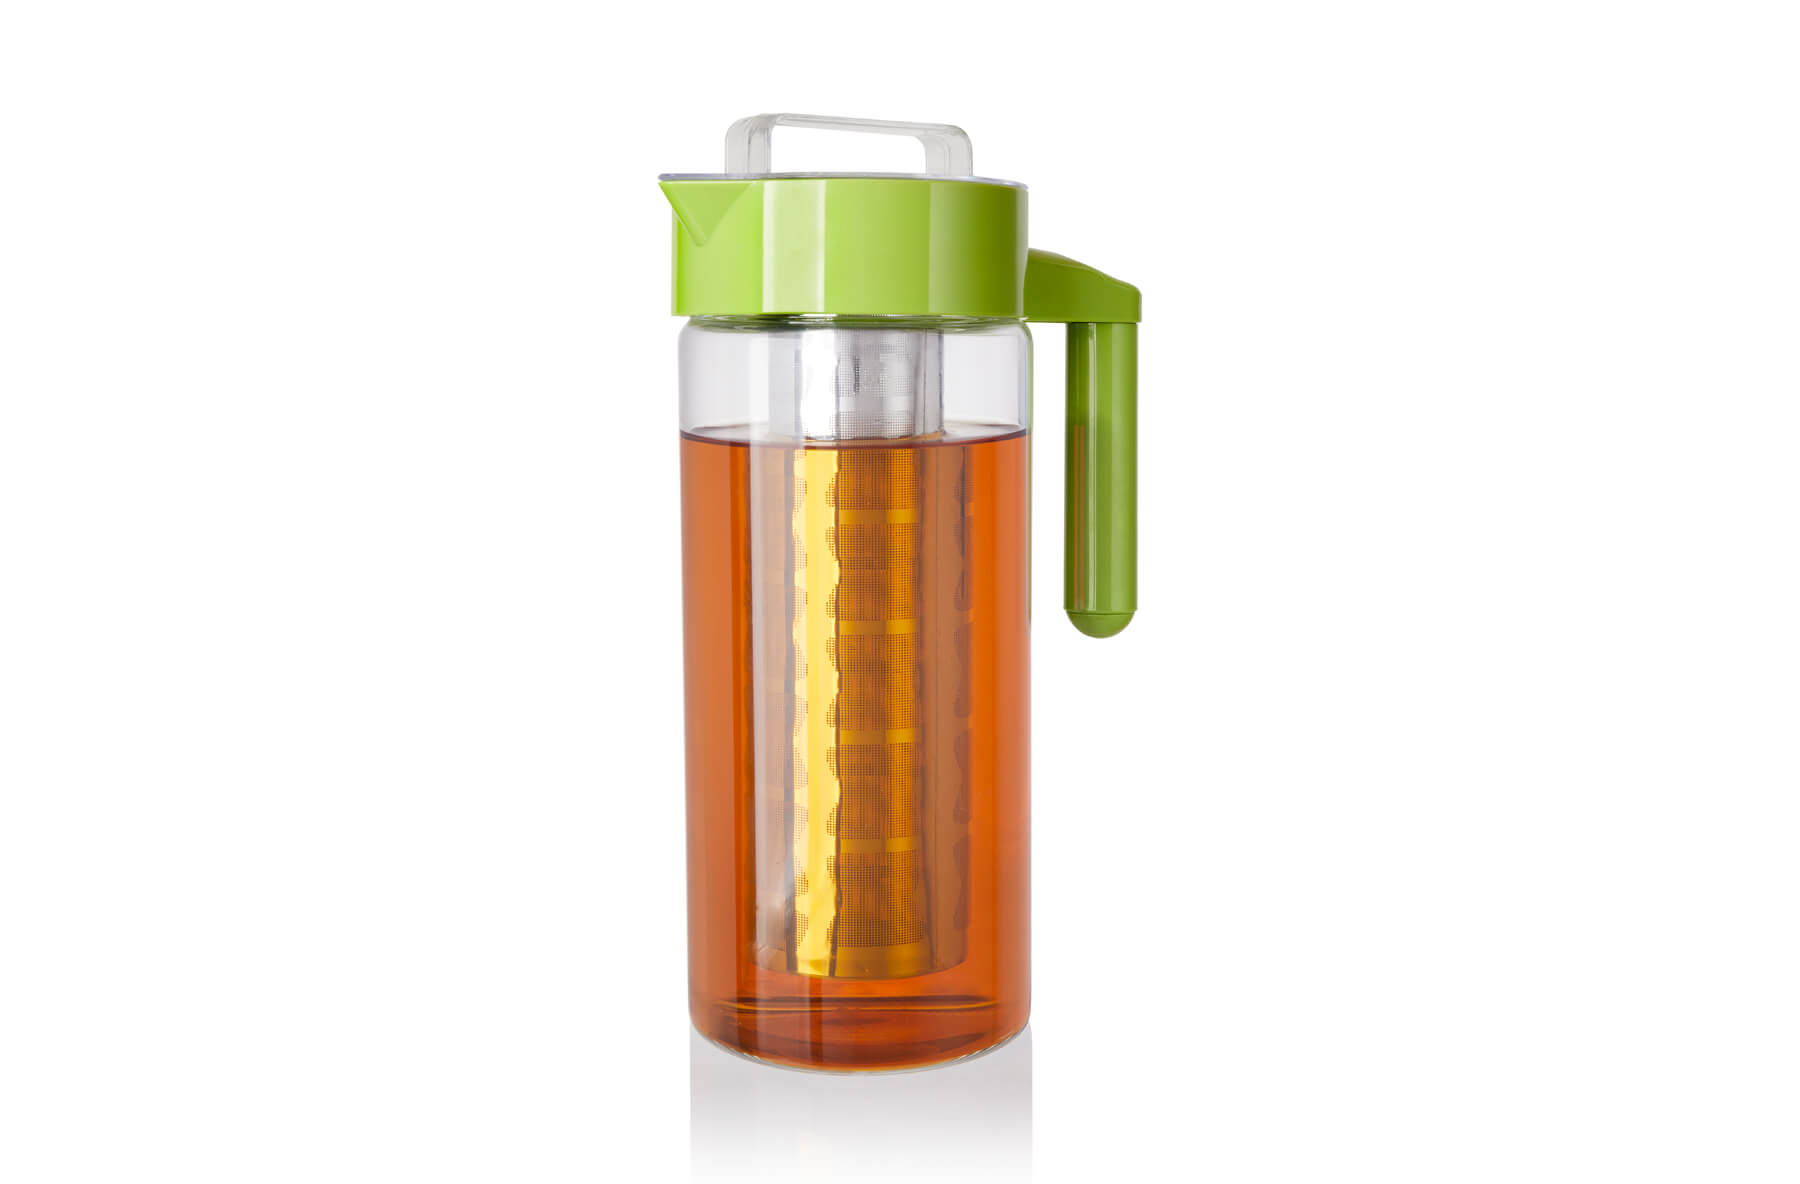 Iced Tea Pitcher with Difuser (32 oz.)